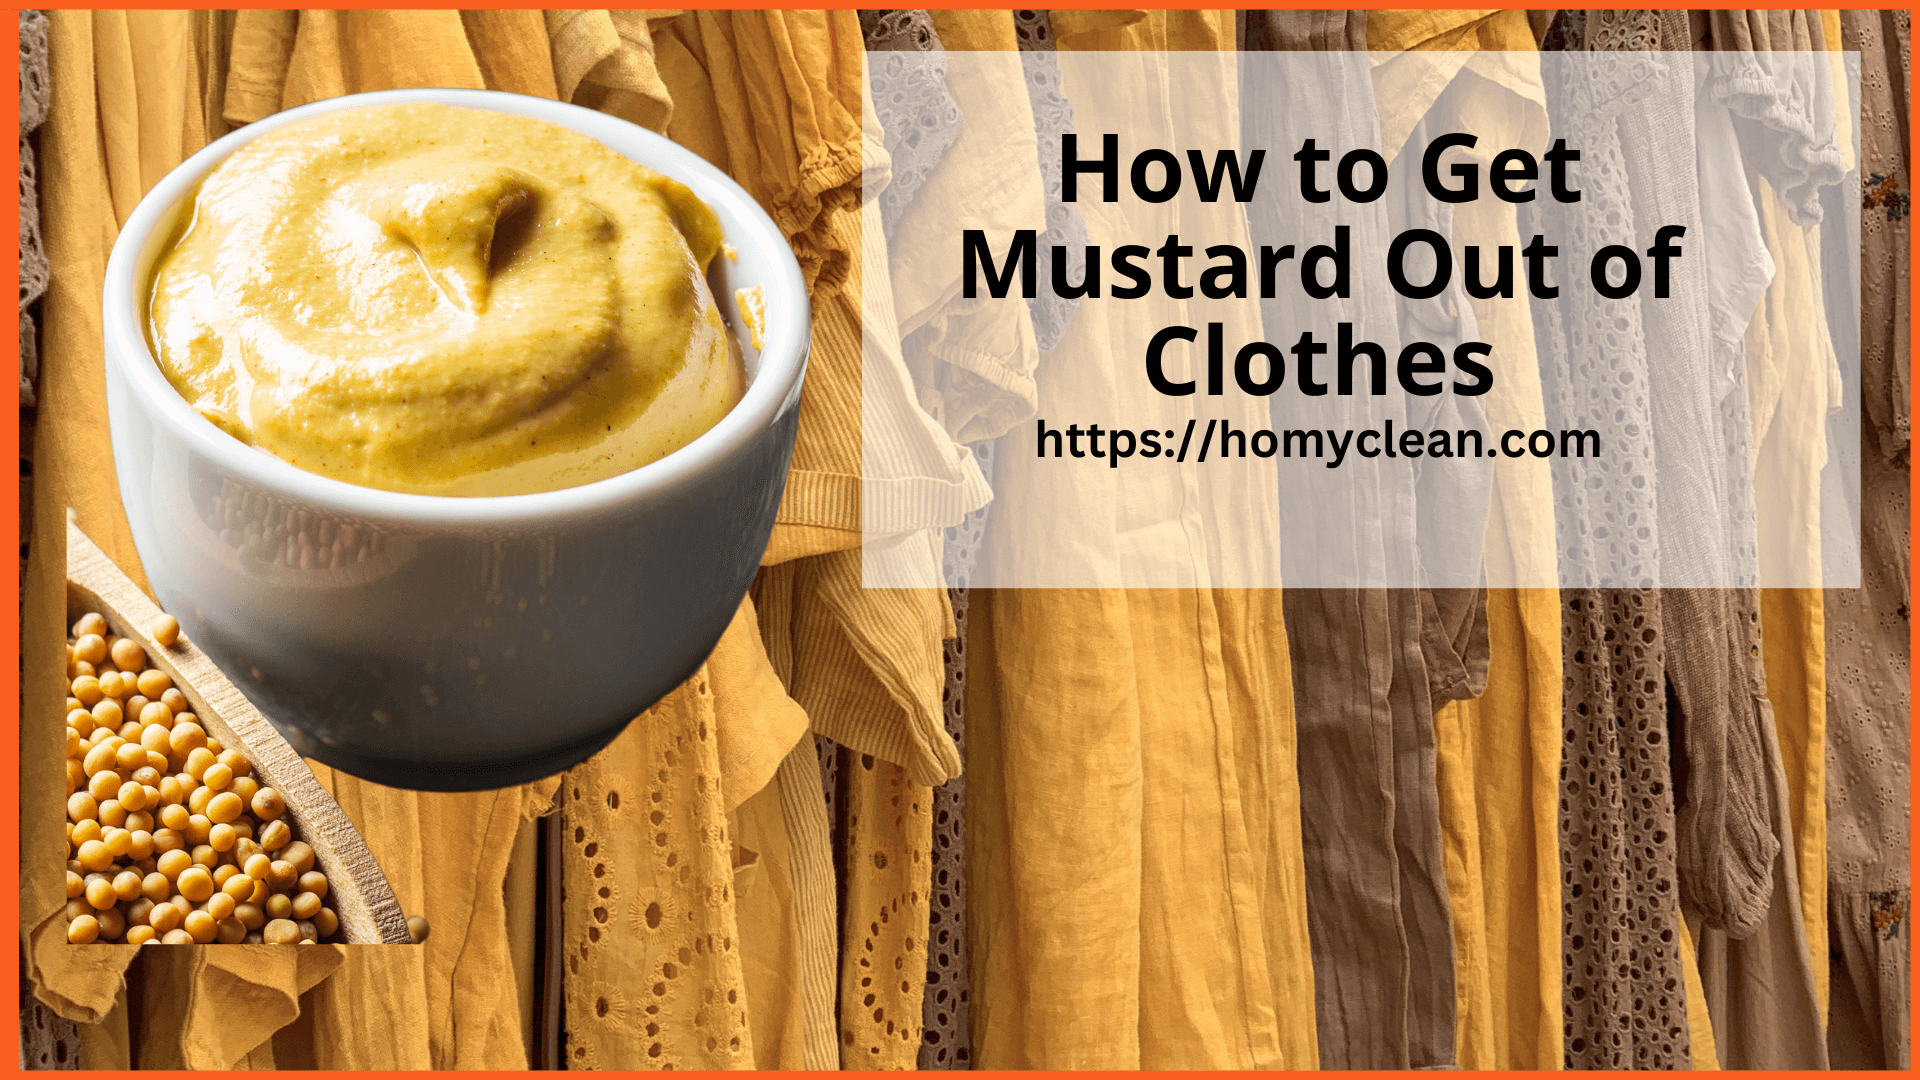 How to Get Mustard Out of Clothes: Tips and Tricks